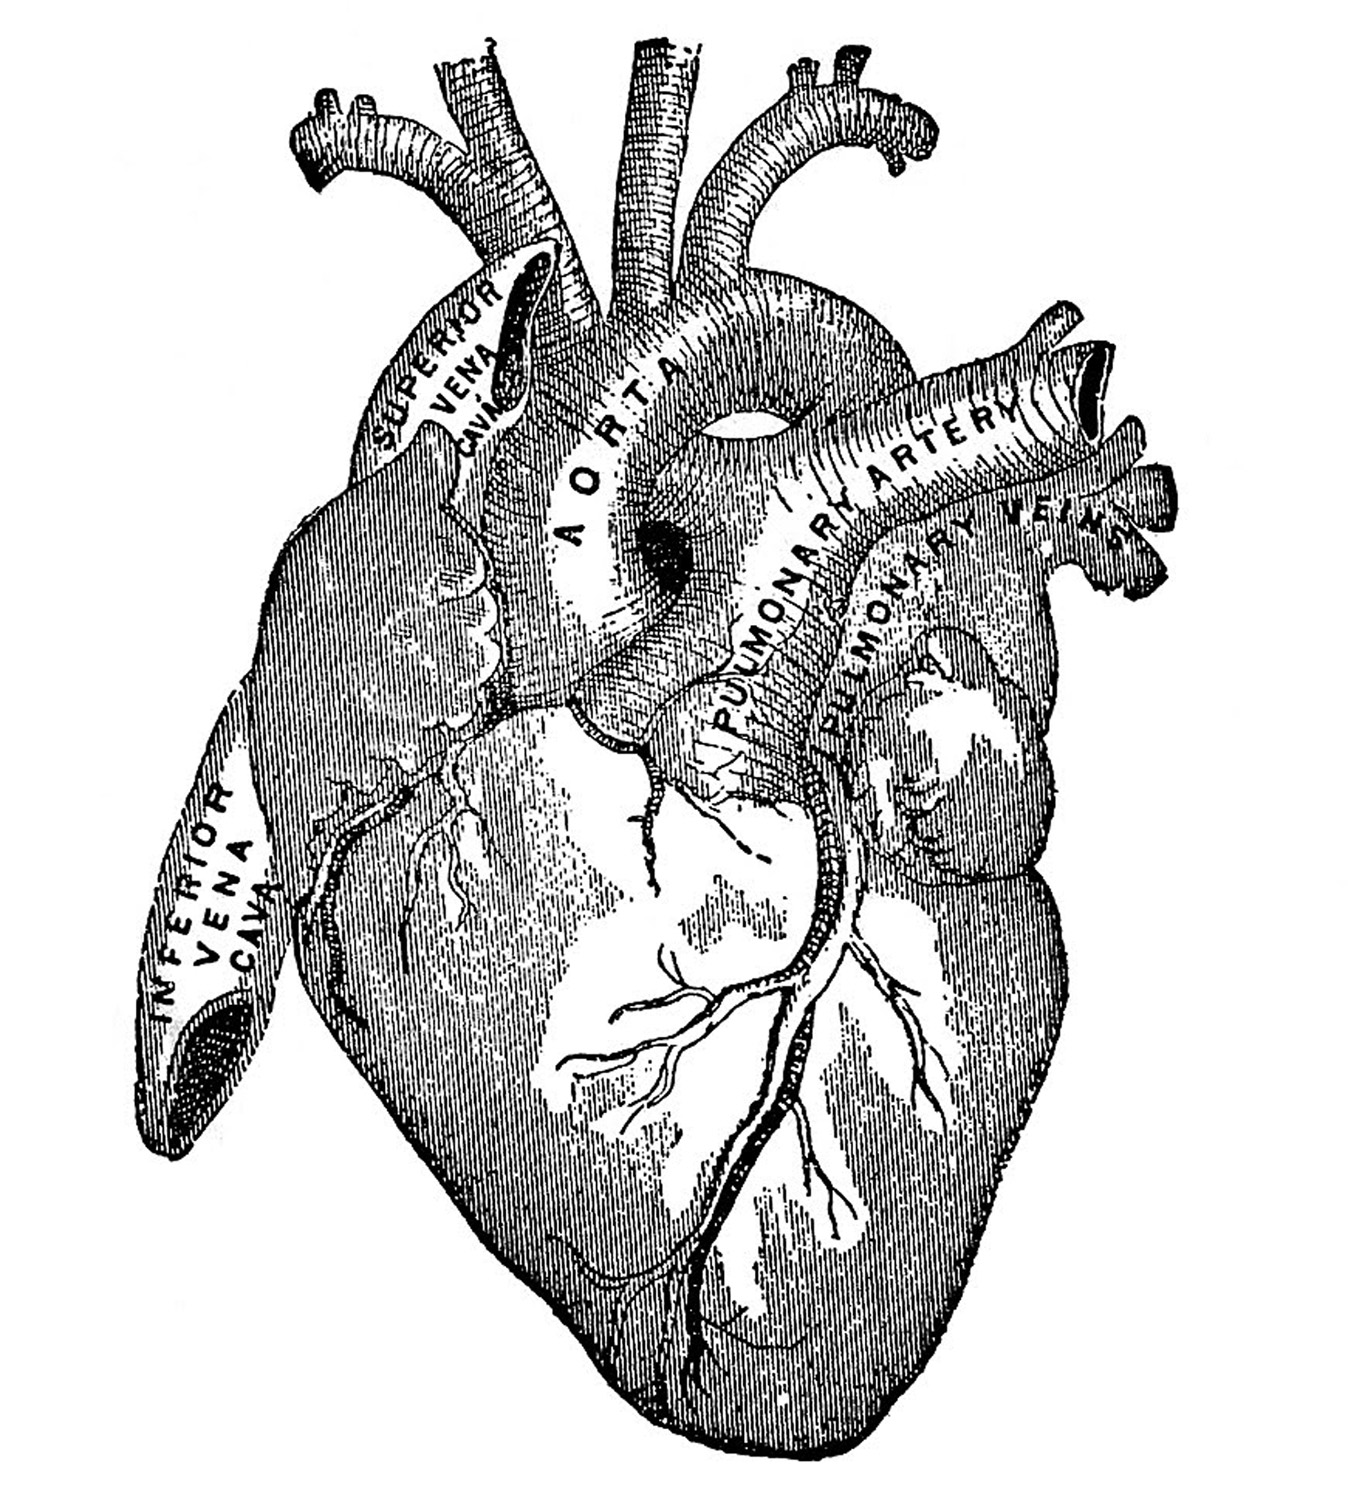 6 Anatomical Heart Pictures! - The Graphics Fairy